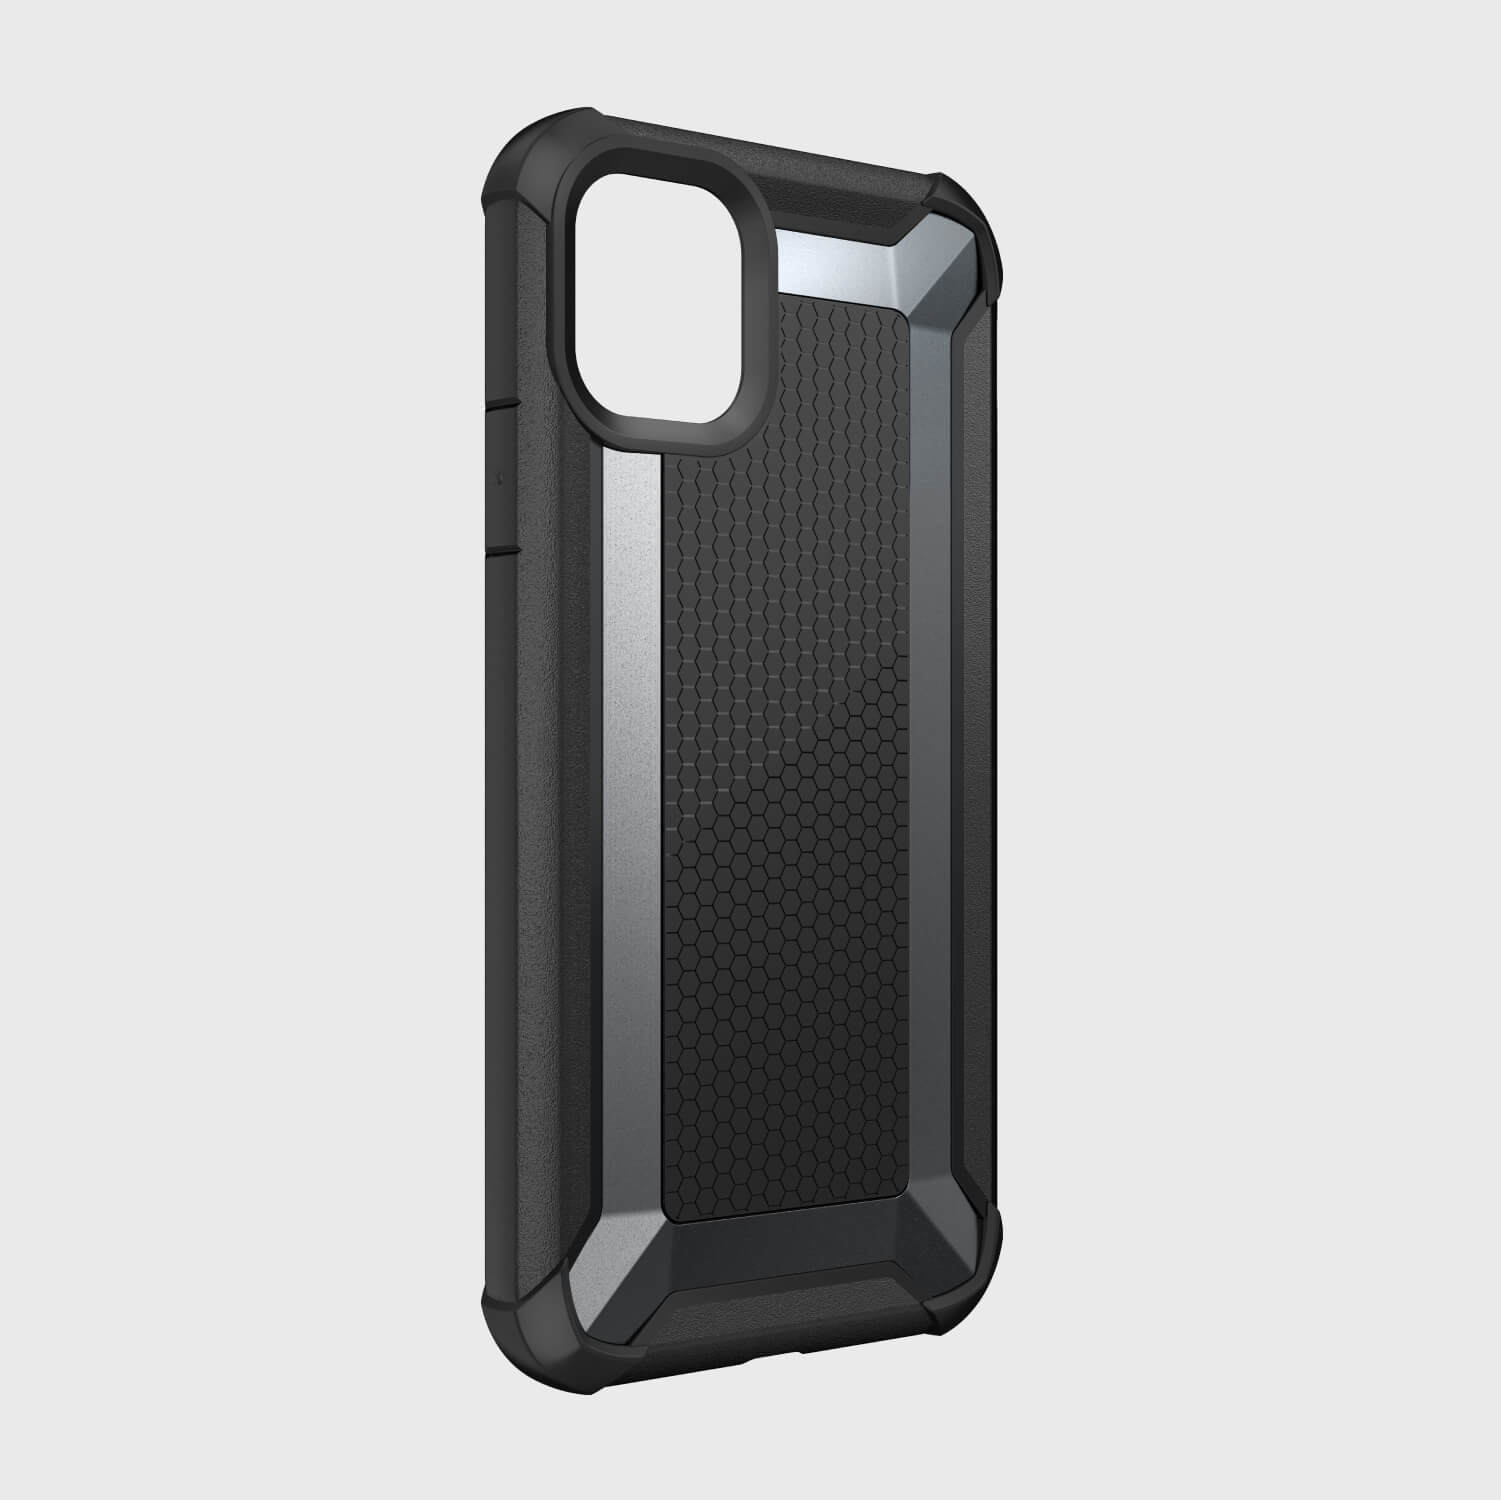 The shock-absorbing iPhone 11 Pro case is shown.

The shock-absorbing iPhone 11 Pro Case - TACTICAL by Raptic is shown.